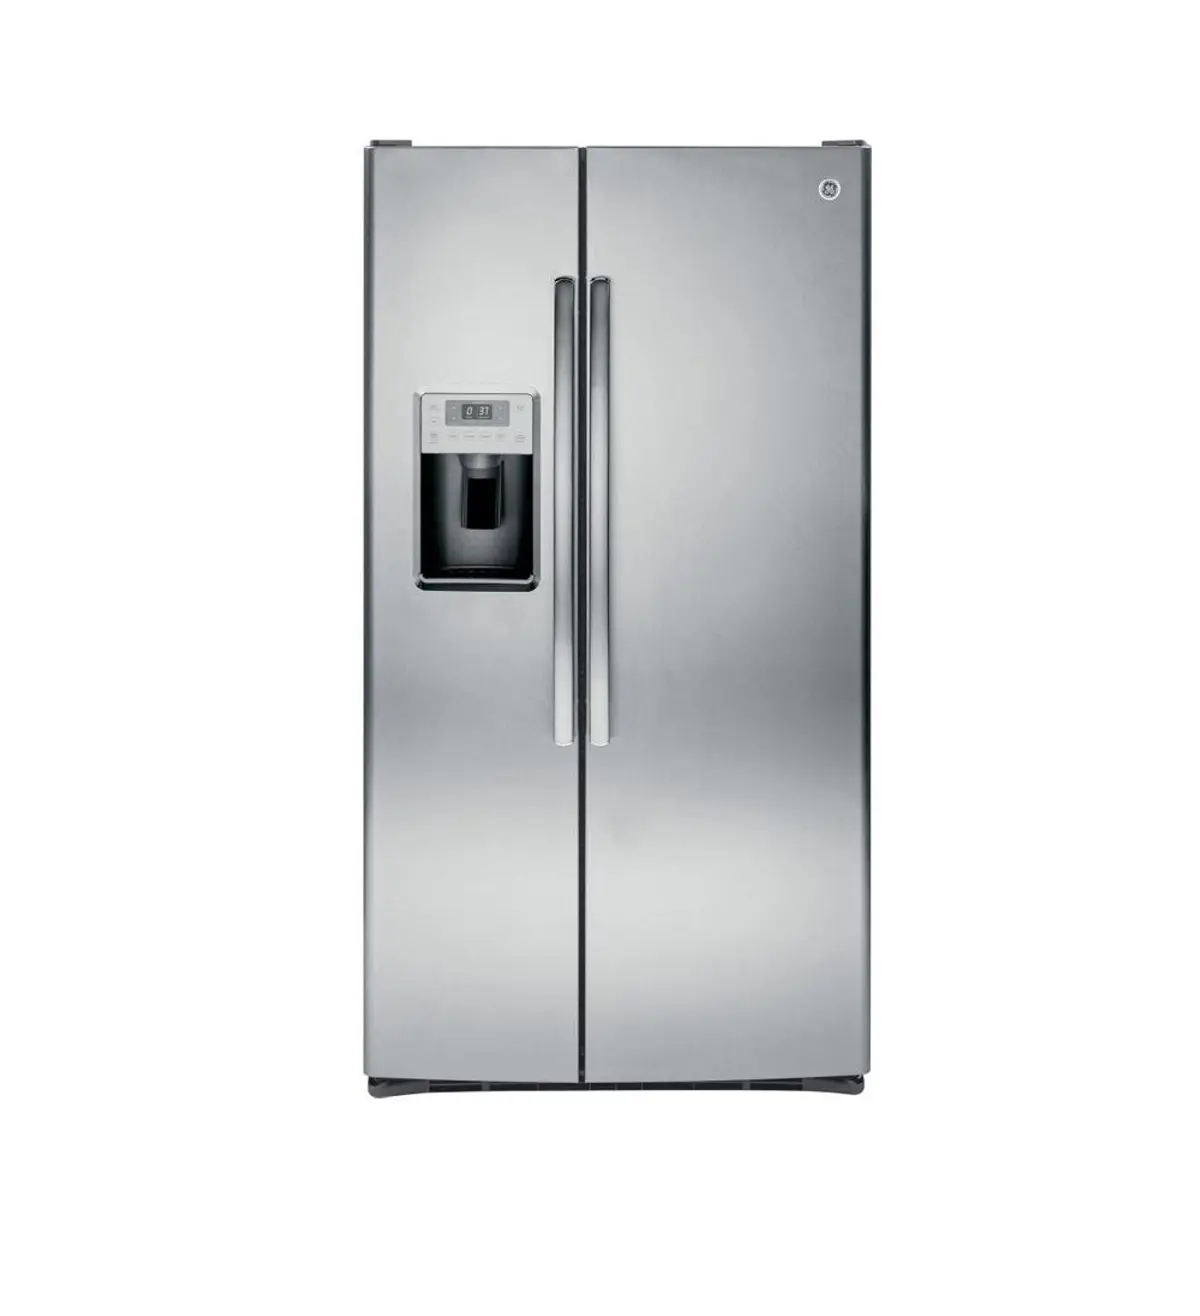 GE PSS28KSH 36 Inch best rated Side-by-Side Refrigerator review